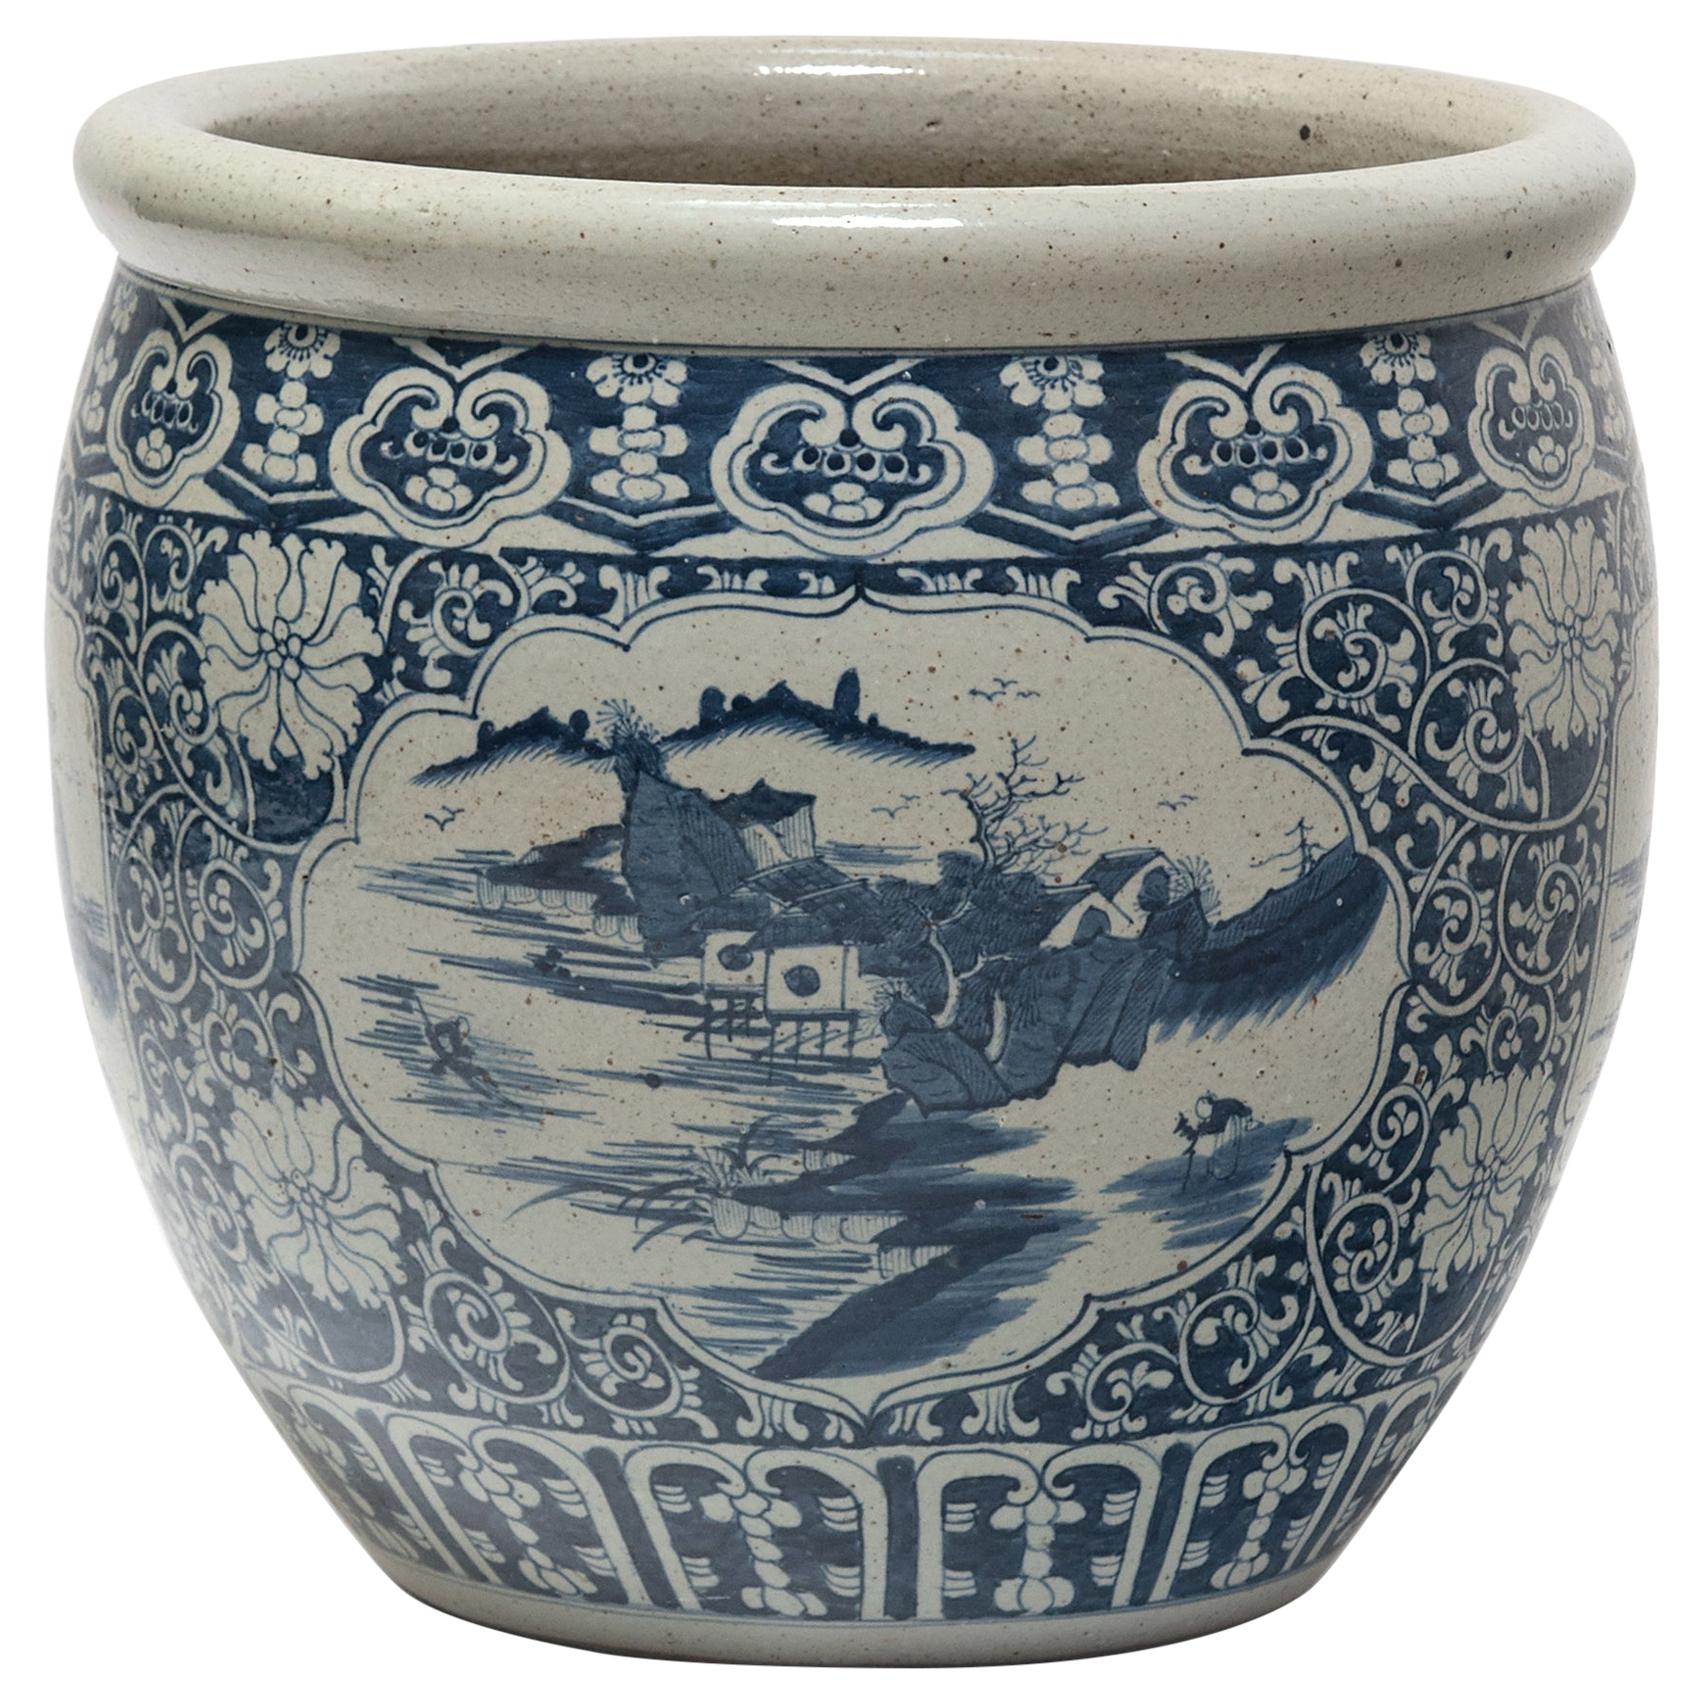 Chinese Blue and White Fish Bowl with Shan Shui Landscape